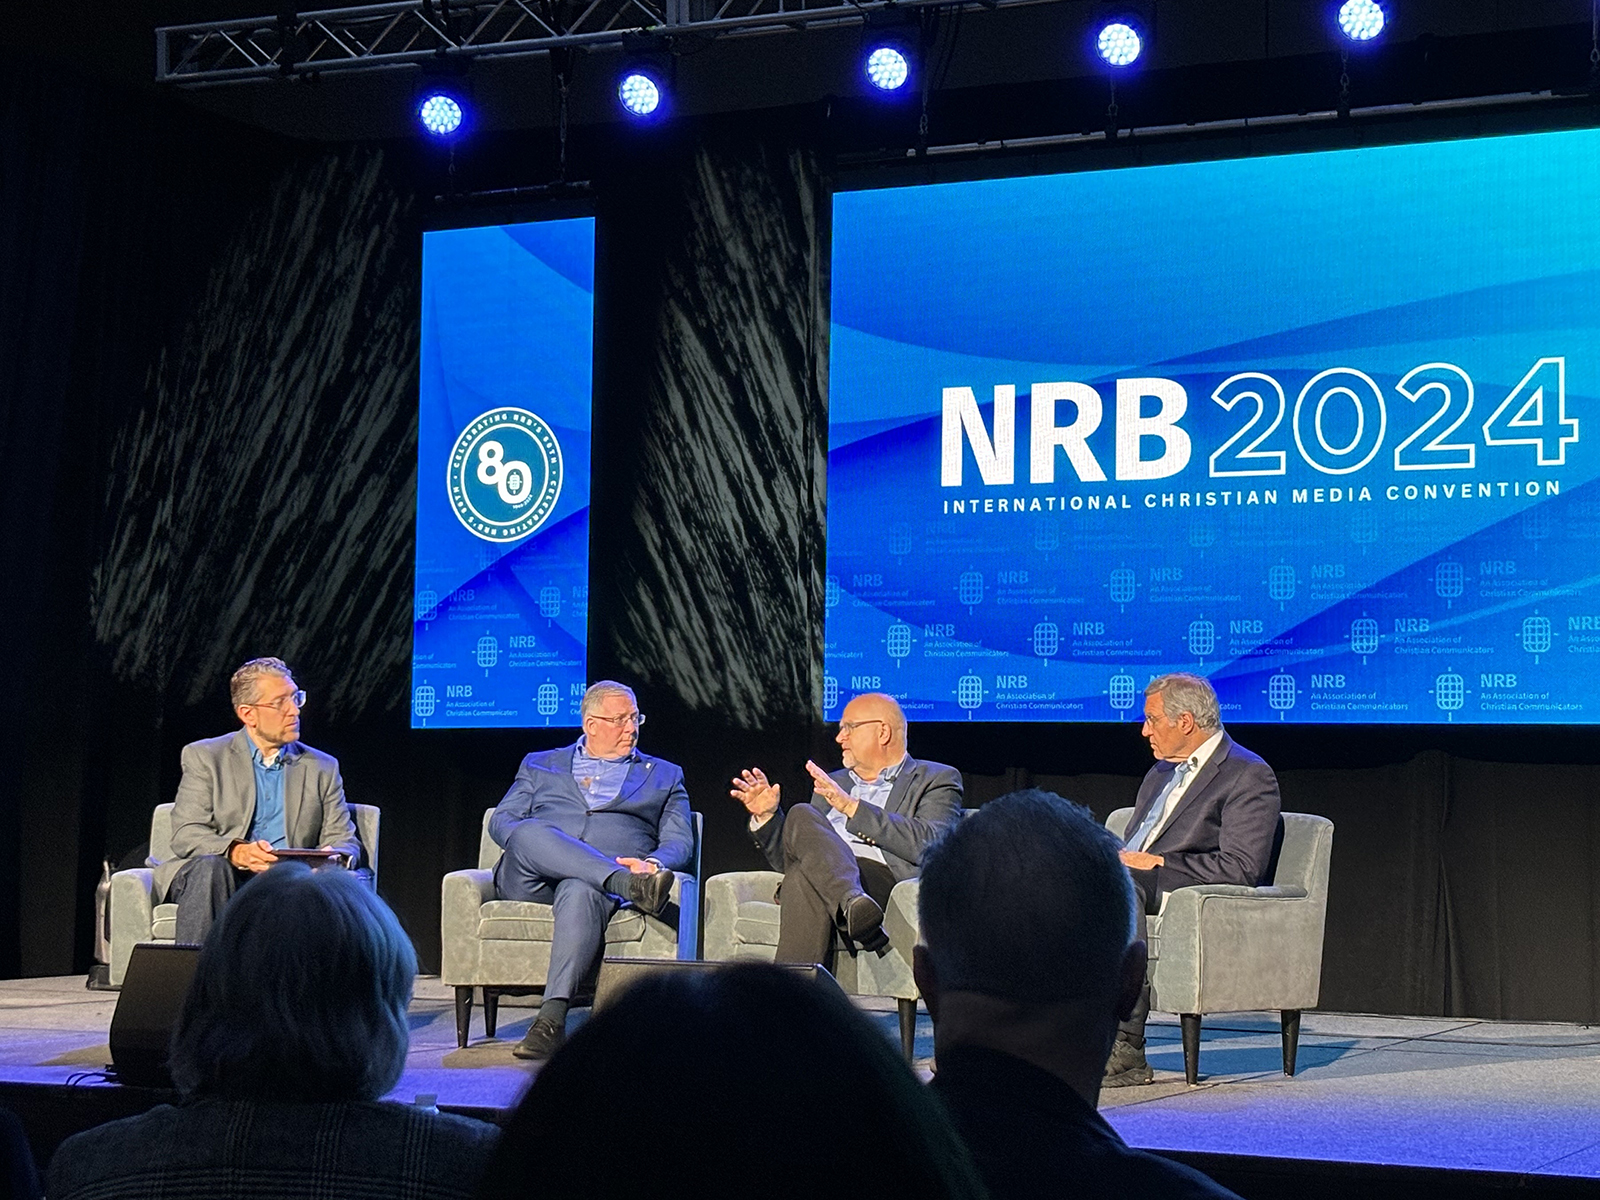 A panel on Israel during the National Religious Broadcasters convention at the Gaylord Opryland Resort and Convention Center in Nashville, Tenn. (RNS photo/Bob Smietana)